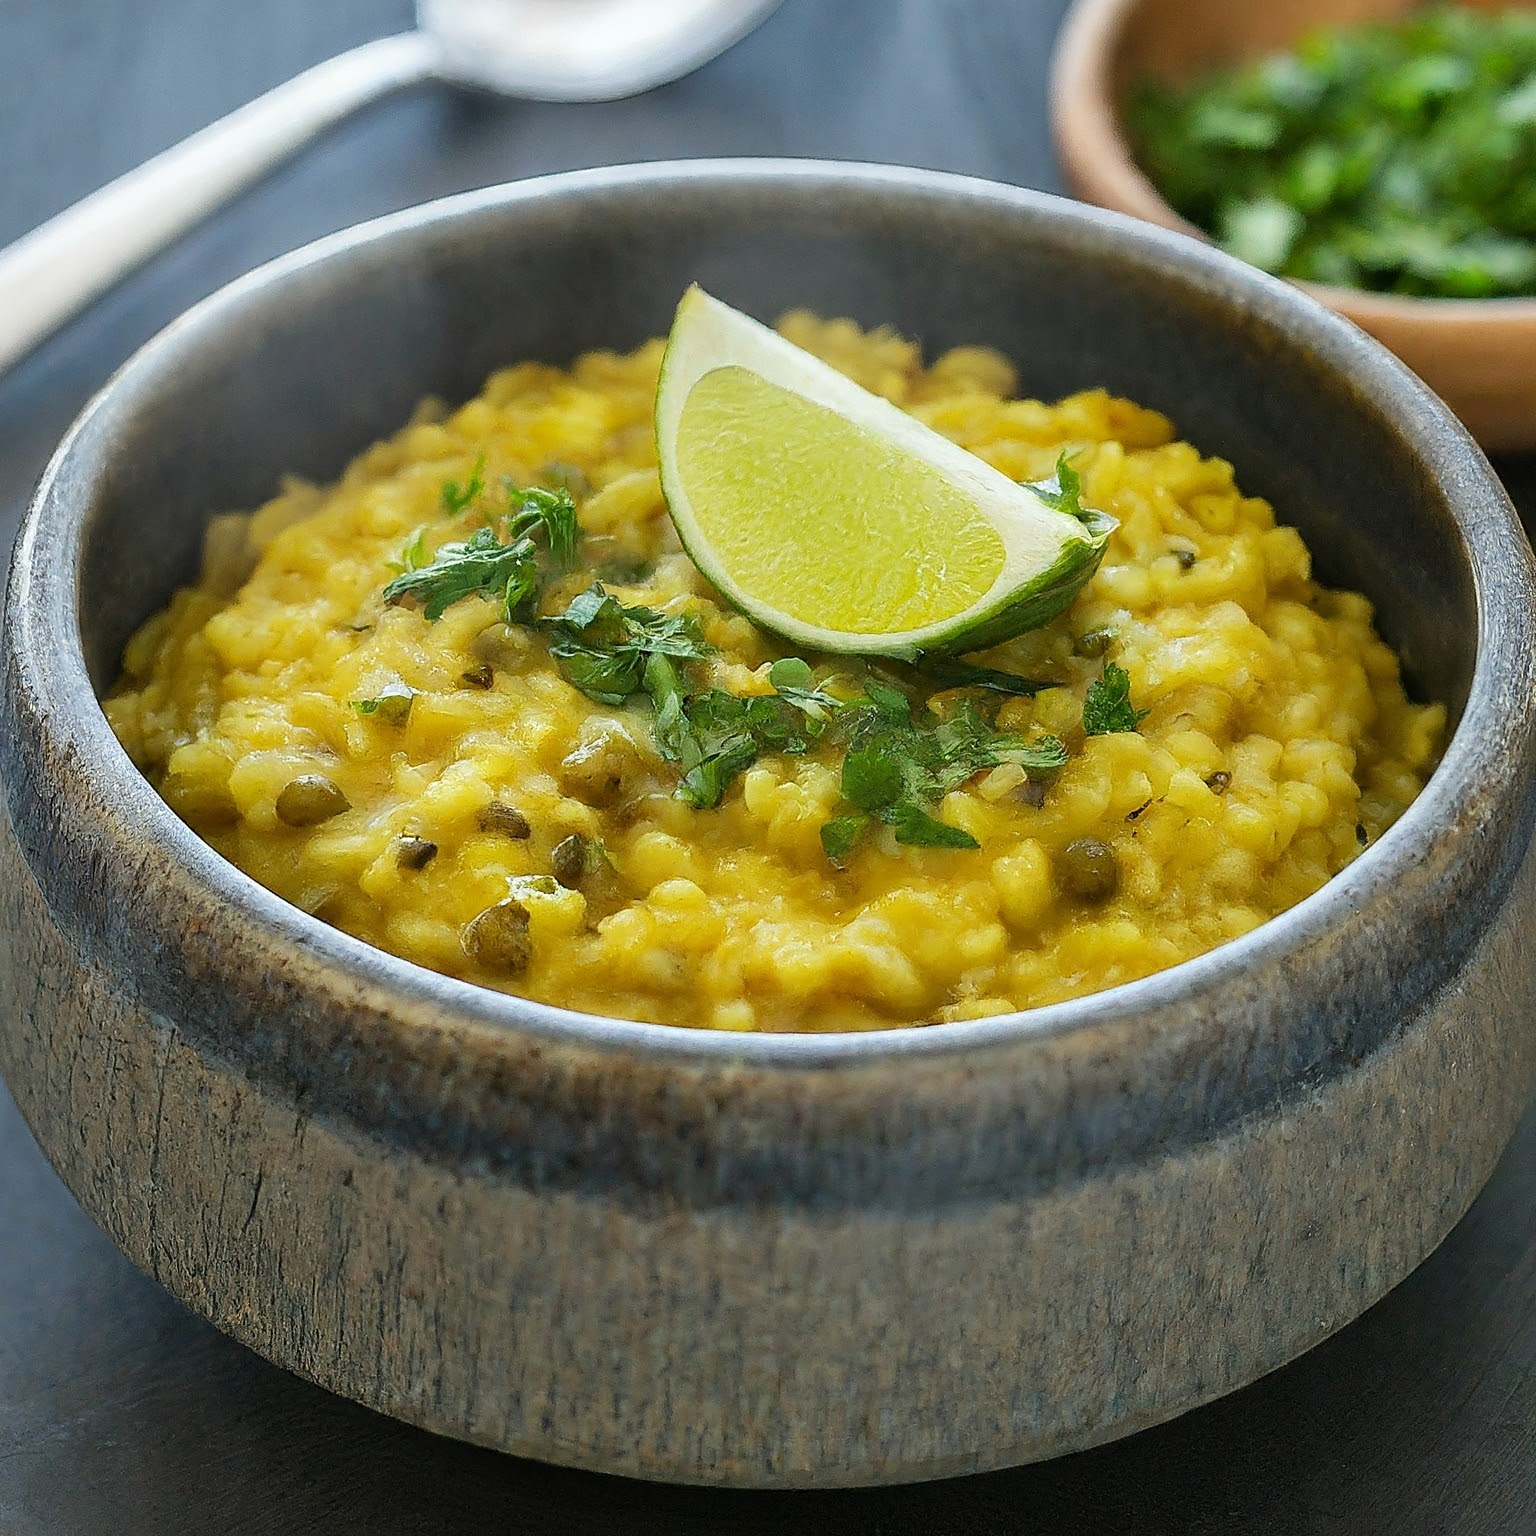 A steaming bowl of Moong Dal Khichdi, a lentil and rice dish garnished with cilantro and lime.